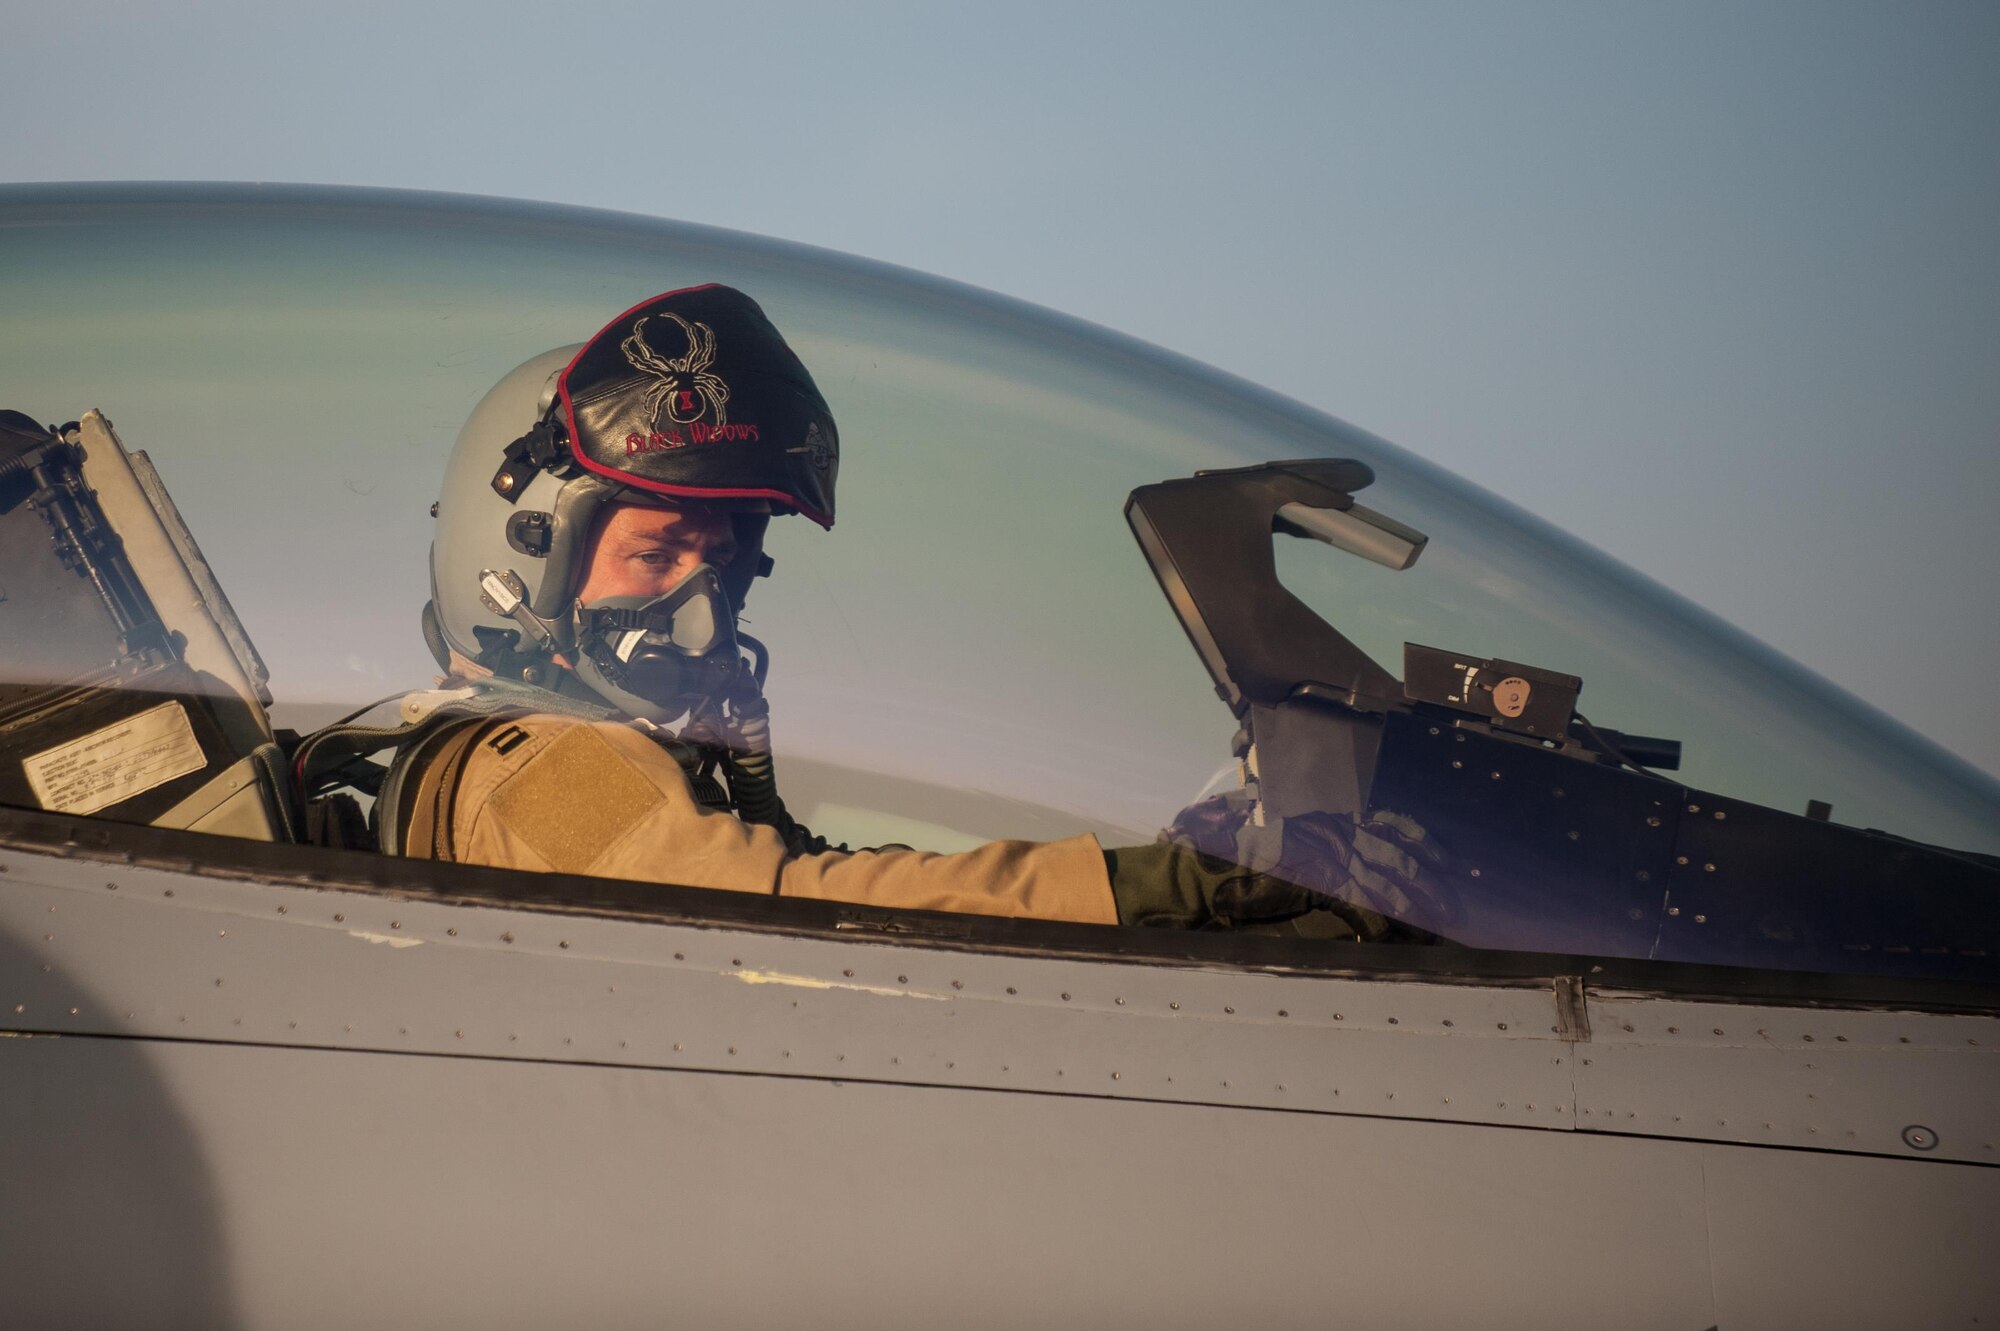 Capt. Tyler McBride, 421st Expeditionary Fighter Squadron director of operations, deployed from Hill Air Force Base, Utah, prepares for his first combat sortie in an F-16 Fighting Falcon at Bagram Airfield, Afghanistan, Oct. 30, 2015. The 555th EFS, deployed from Aviano Air Base, Italy, is nearing the end of its six-month deployment at Bagram and will hand the reins over to the 421st EFS in support of Operation Freedom's Sentinel and NATO's Resolute Support mission. (U.S. Air Force photo by Tech. Sgt. Joseph Swafford/Released)